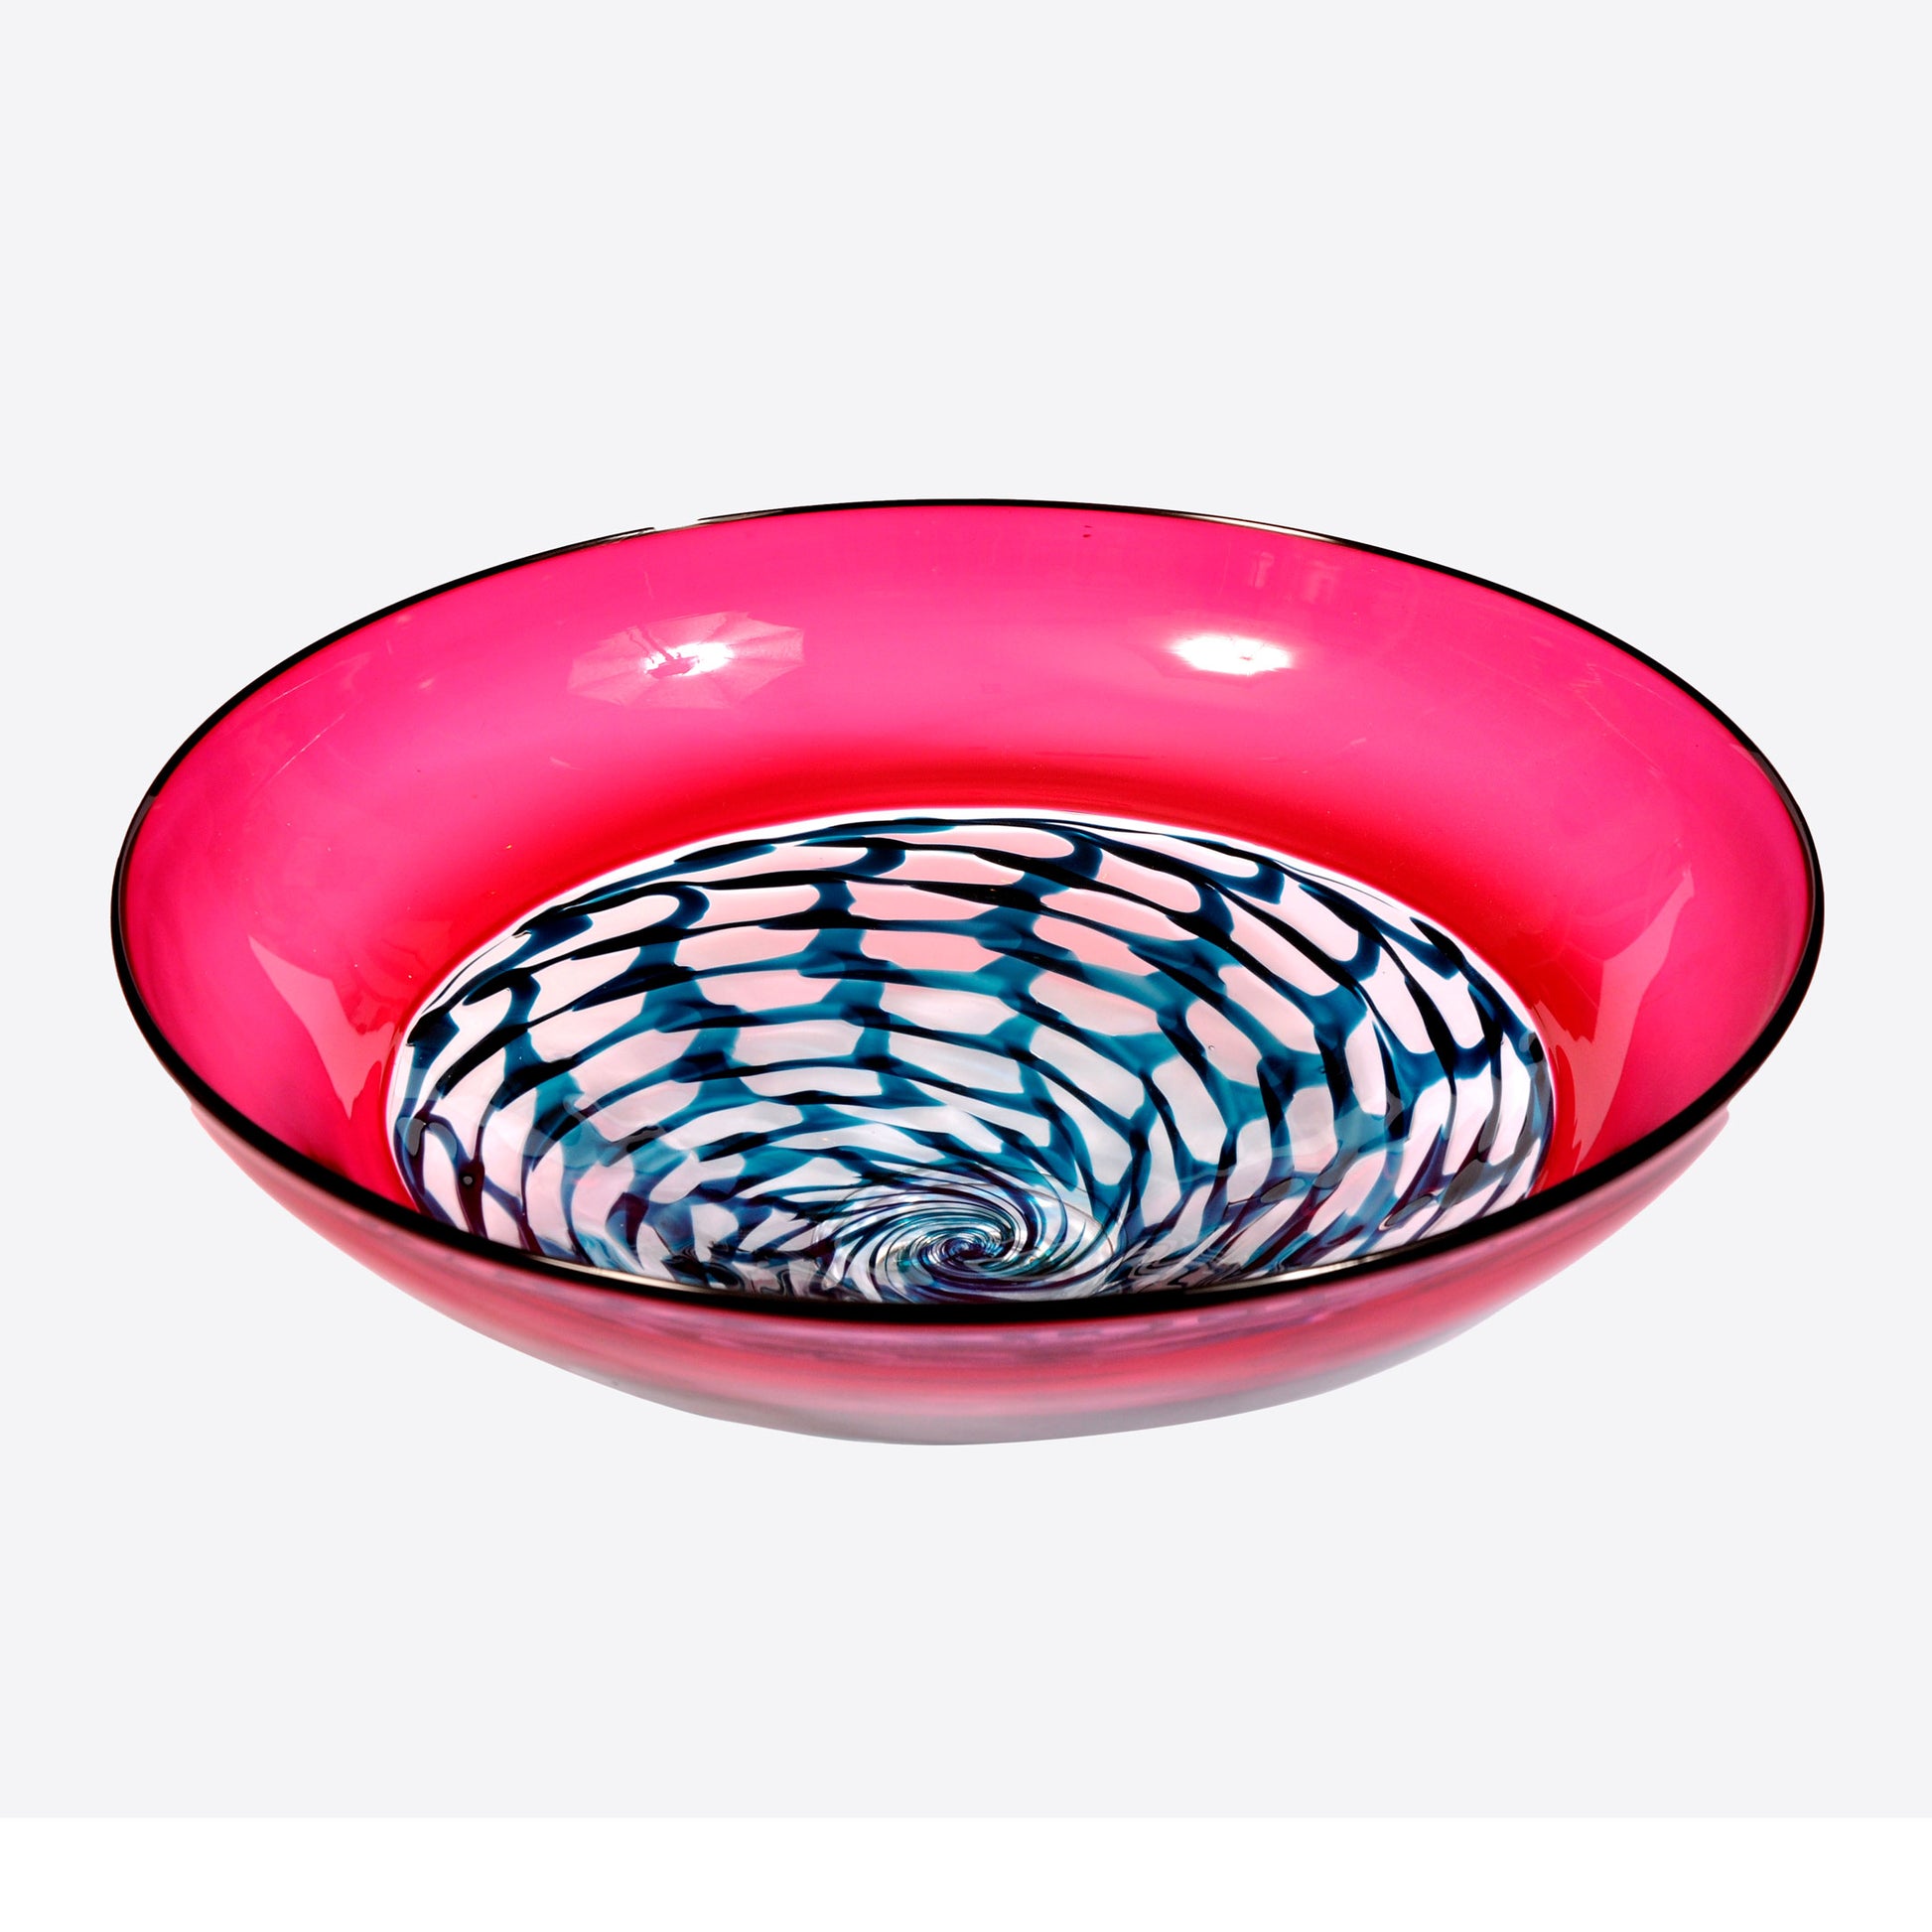 Ruby Lattice Bowl Not specified